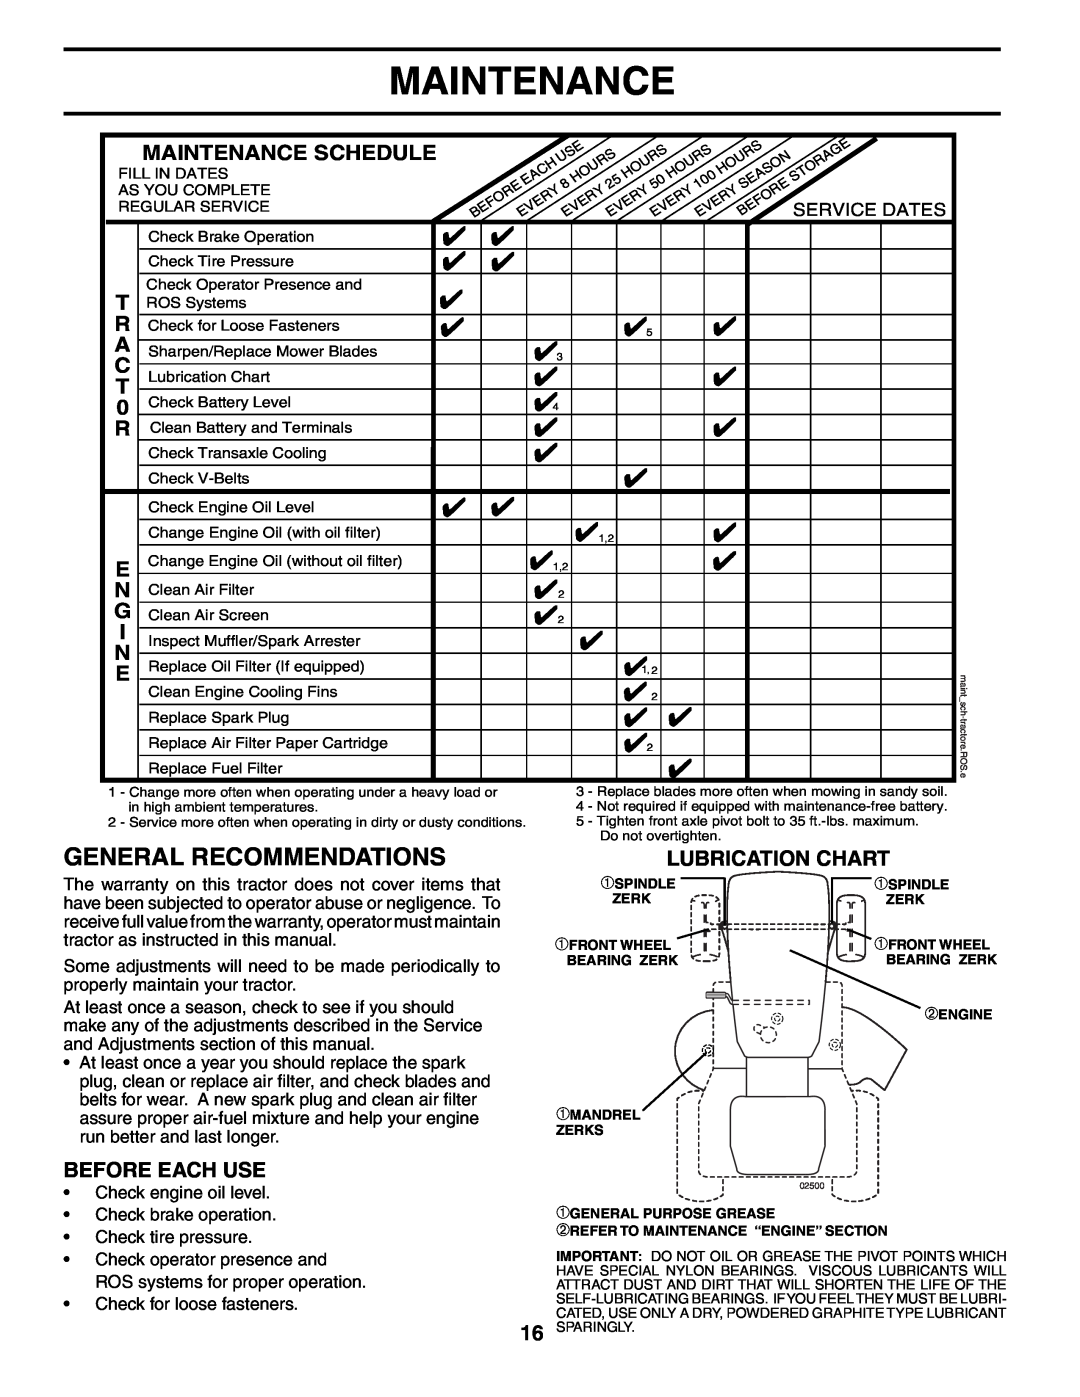 Poulan 195854 manual General Recommendations, Lubrication Chart, Before Each Use, Maintenance Schedule 